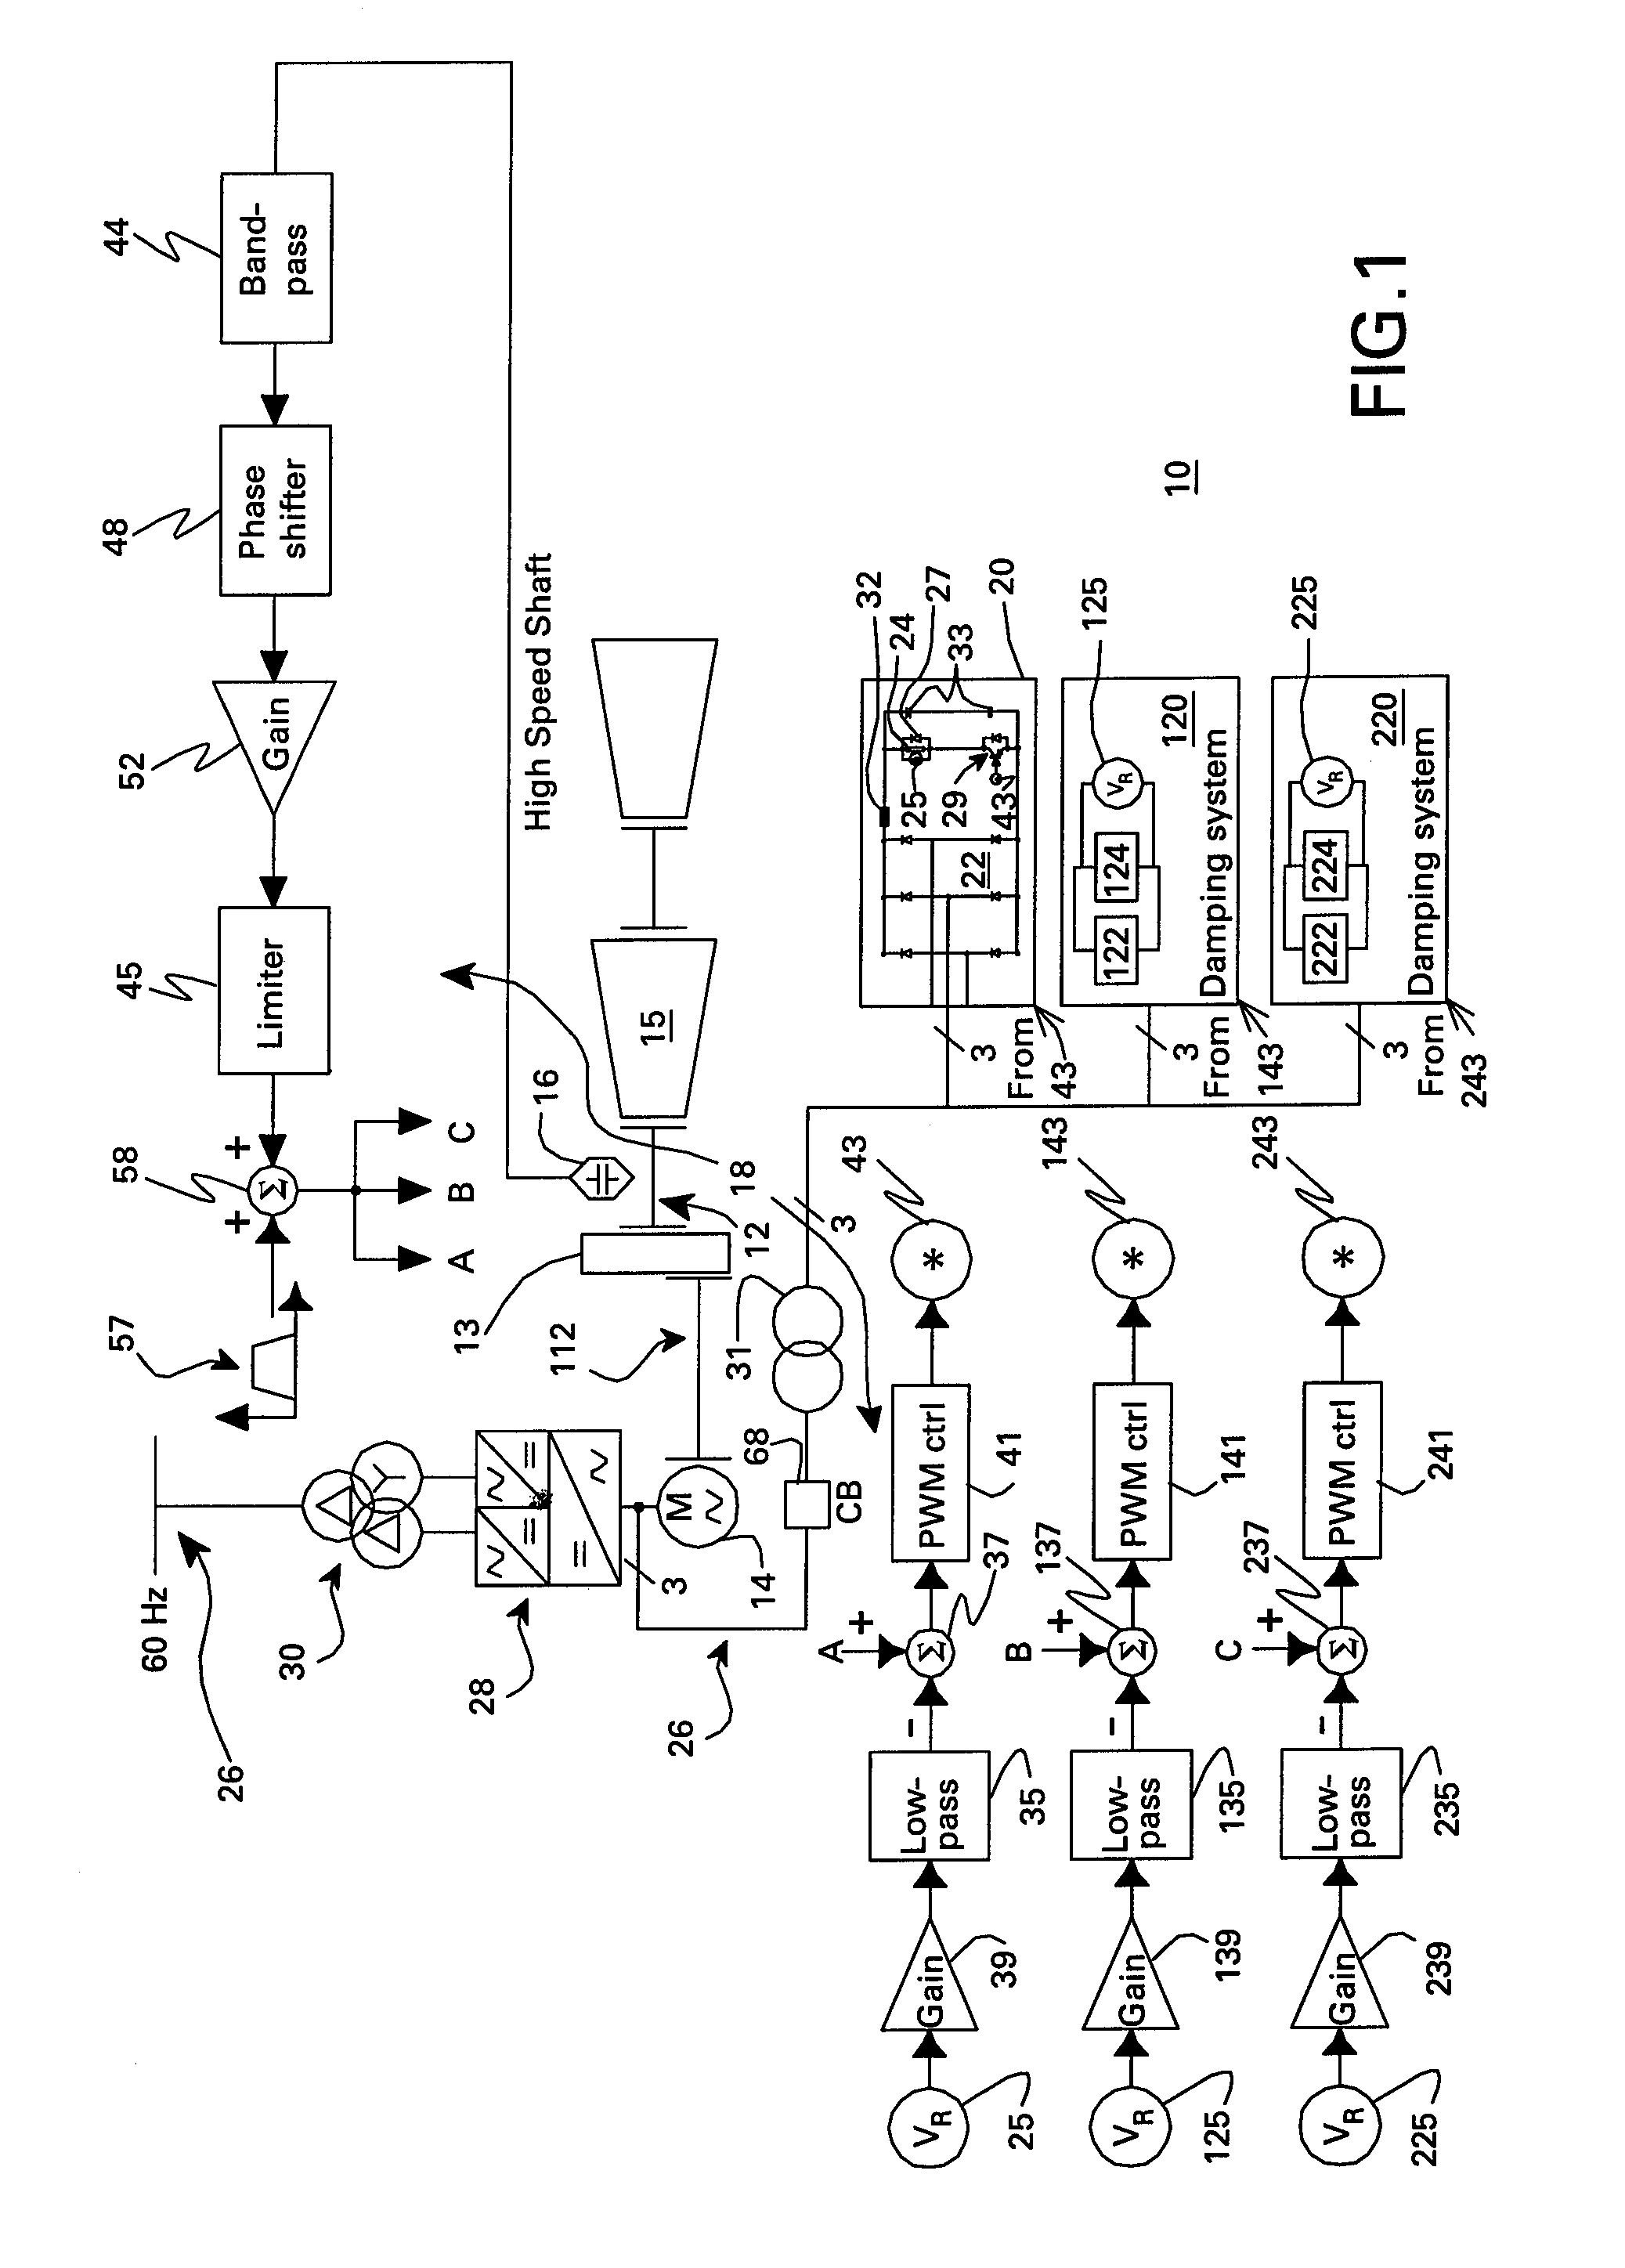 Resistive torsional mode damping system and method